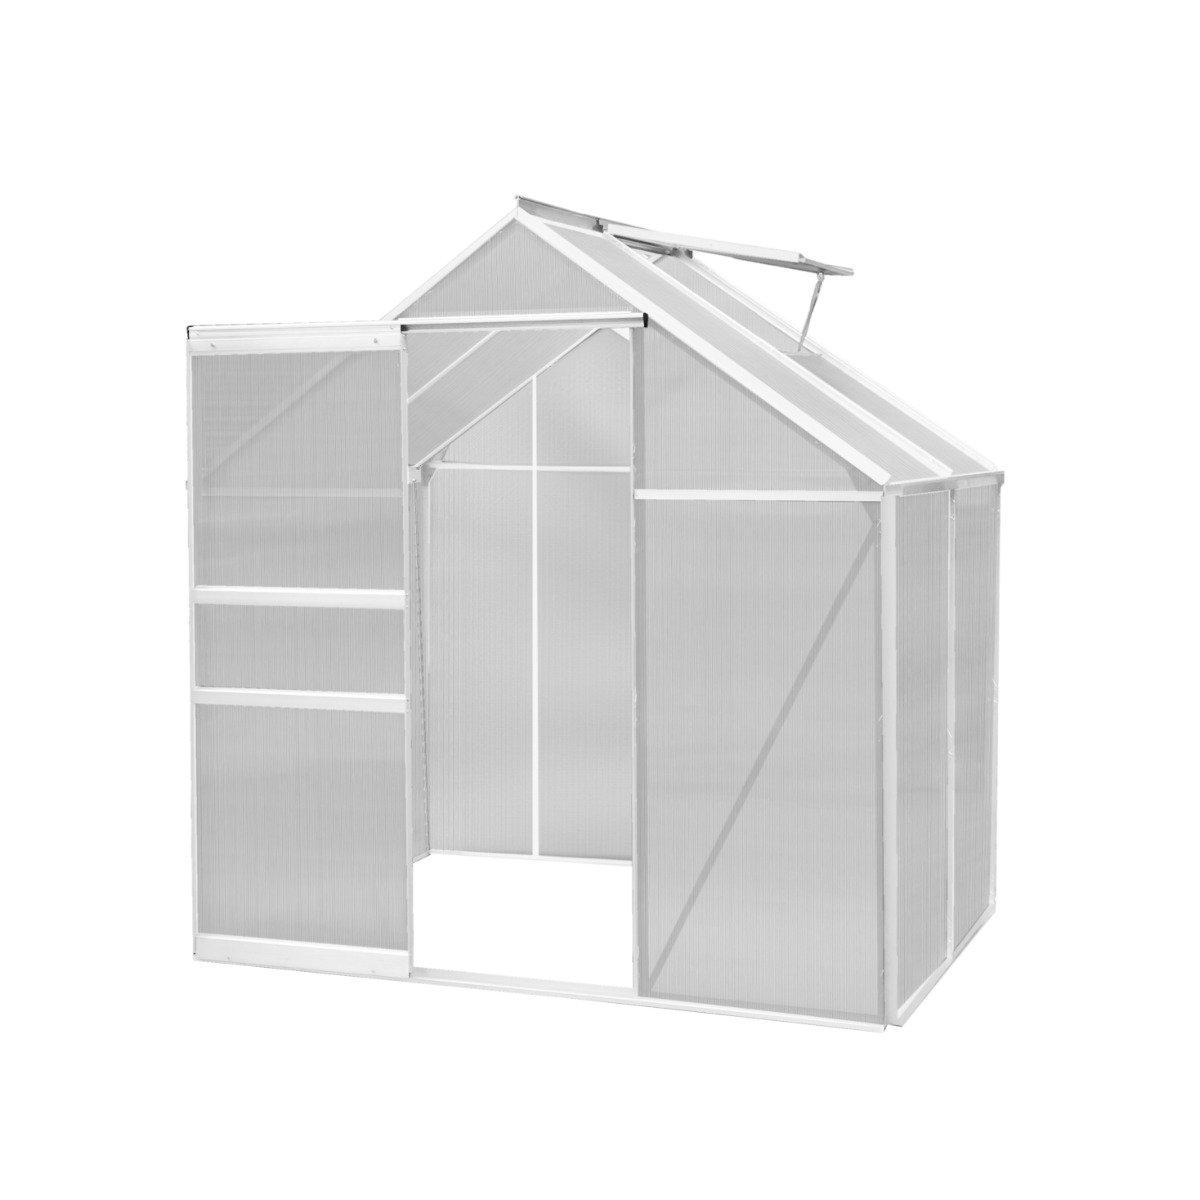 Polycarbonate Greenhouse 6ft x 4ft - Silver